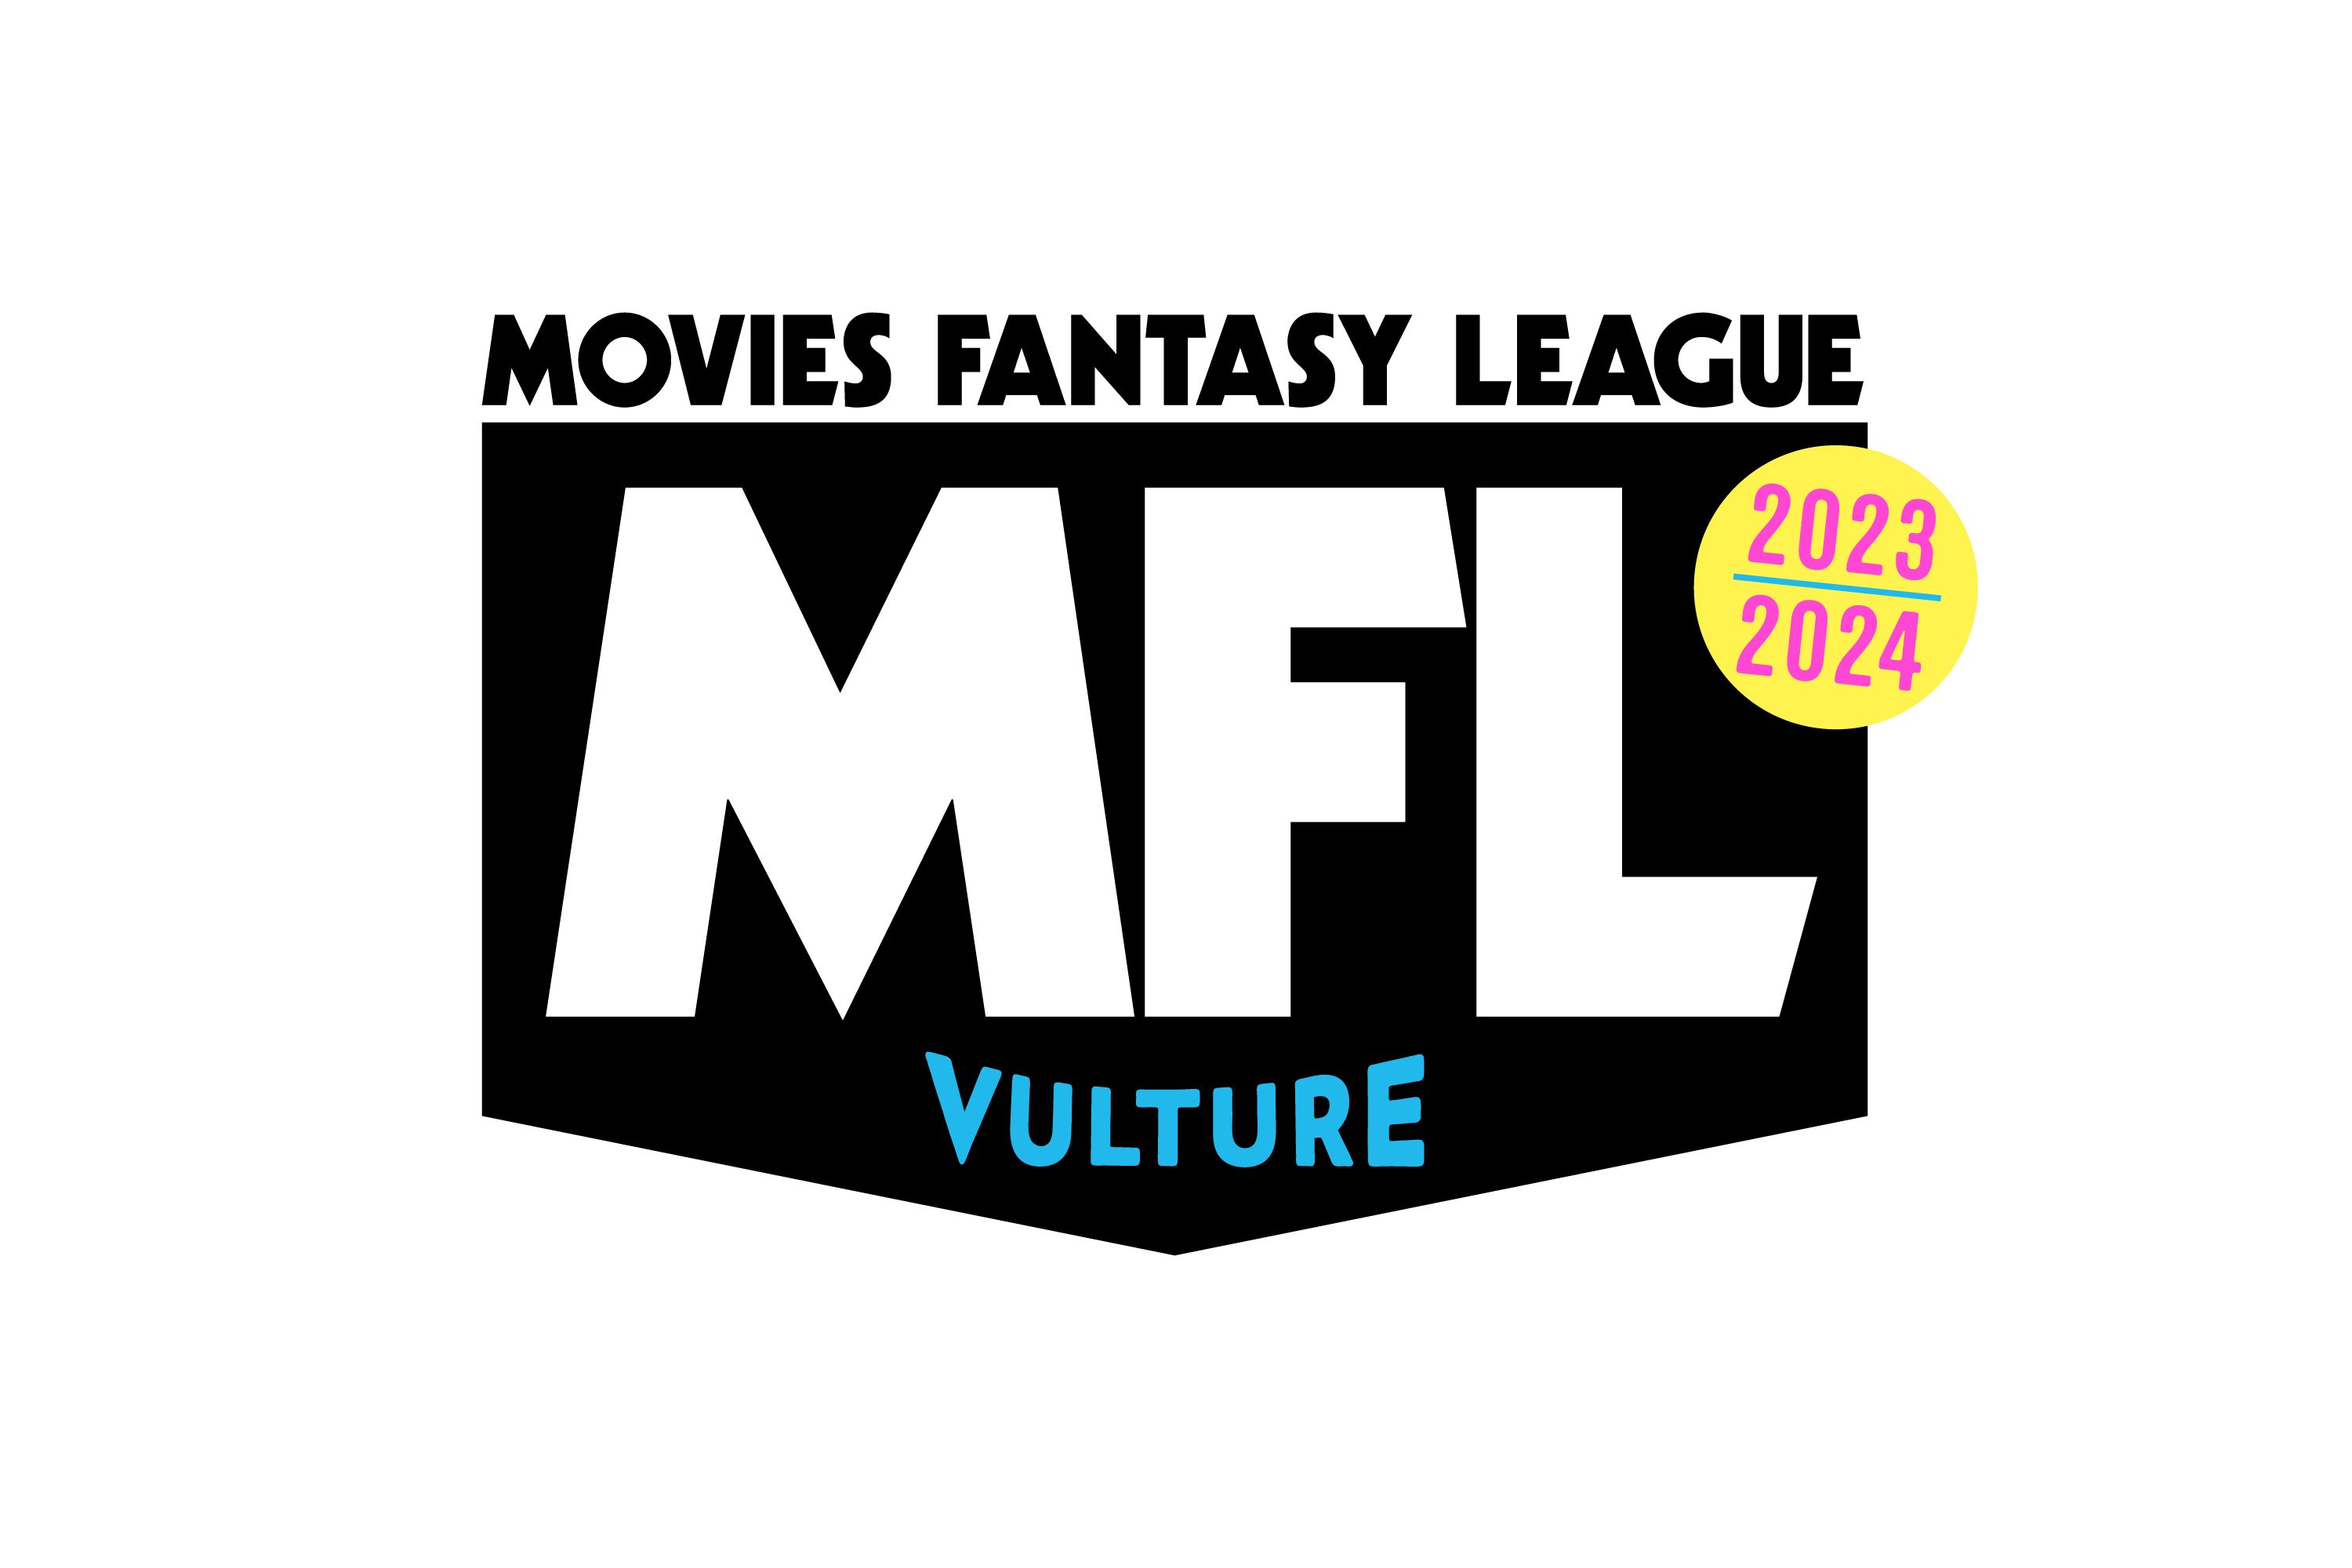 Draft Your Team for Vultures Movies Fantasy League photo image